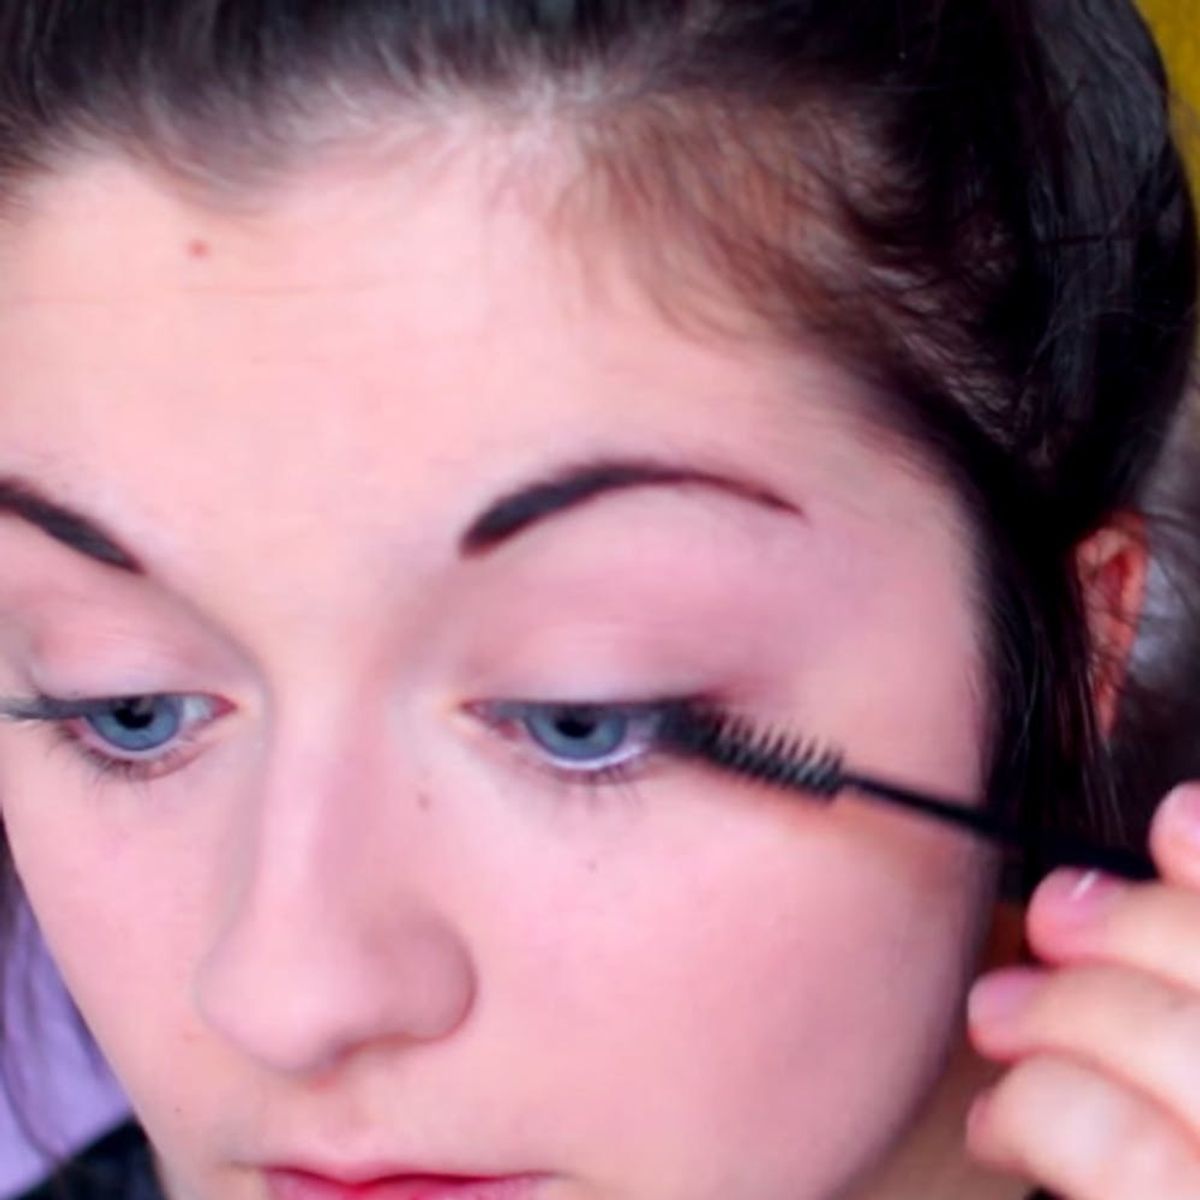 WTF: Oreo Mascara Is the Craziest Beauty Hack EVER